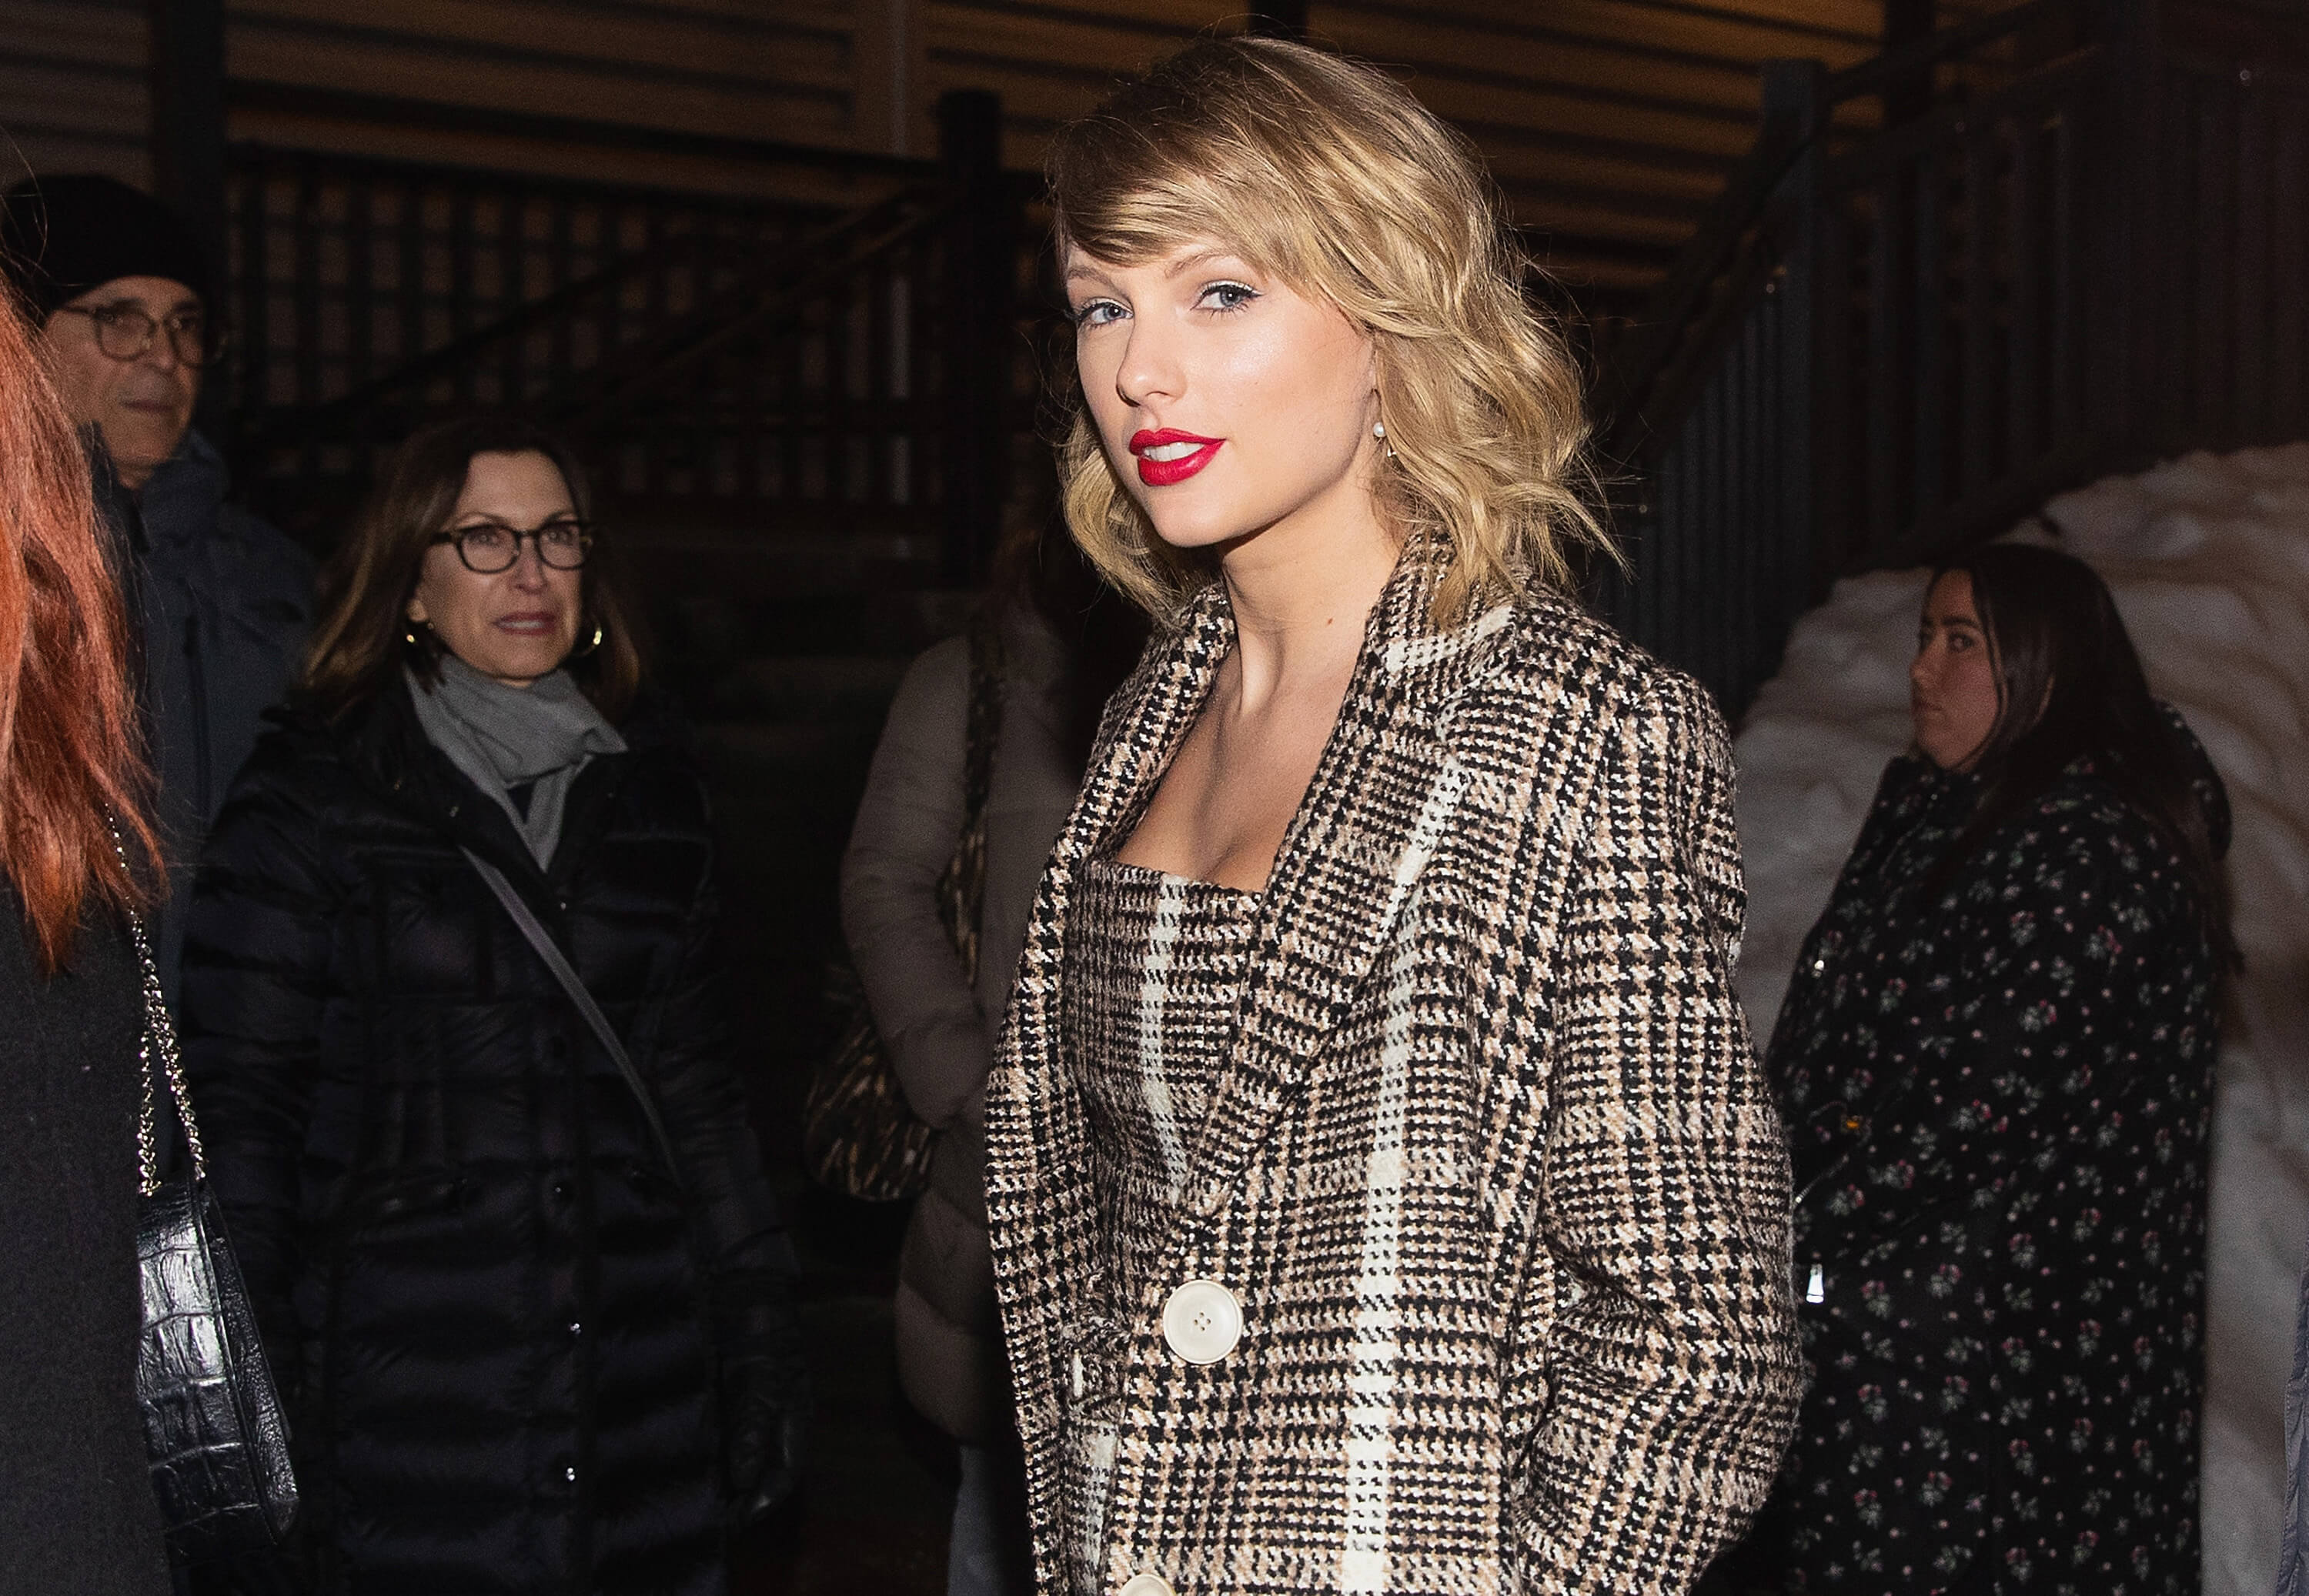 "Welcome to New York" singer Taylor Swift in a coat